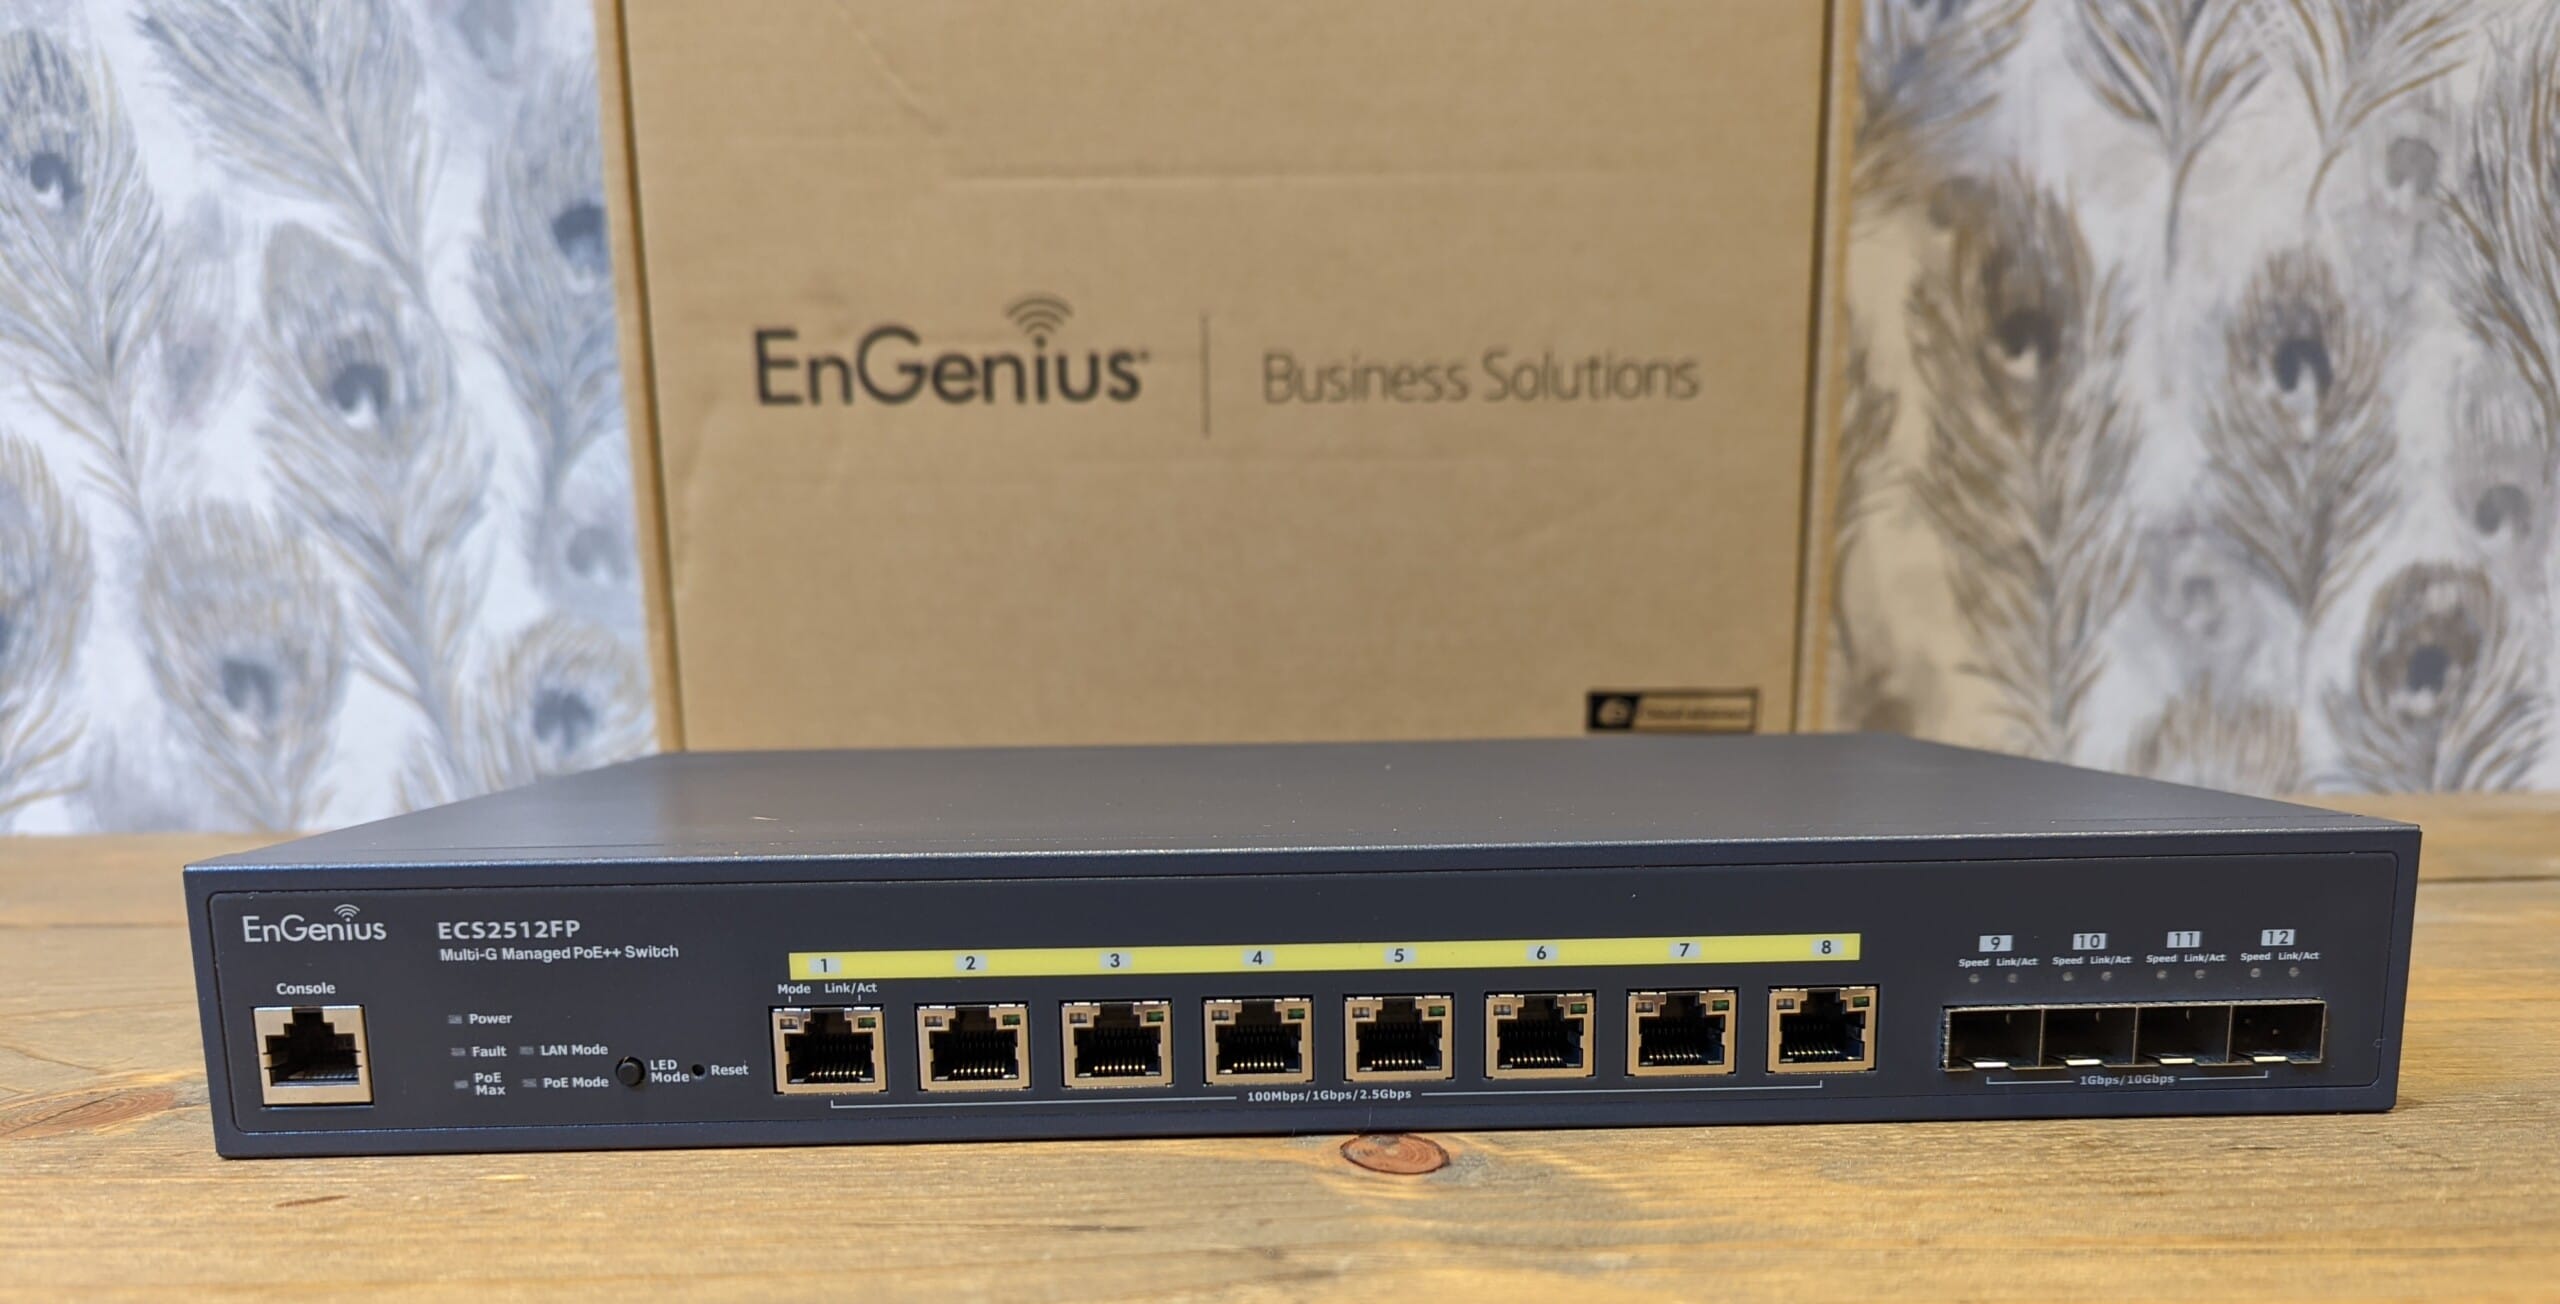 EnGenius ECS2512FP Review: 8-port 2.5G Cloud Managed POE Switch Review with 4x 10Gb SFP+ ideal for WiFi 6 access points